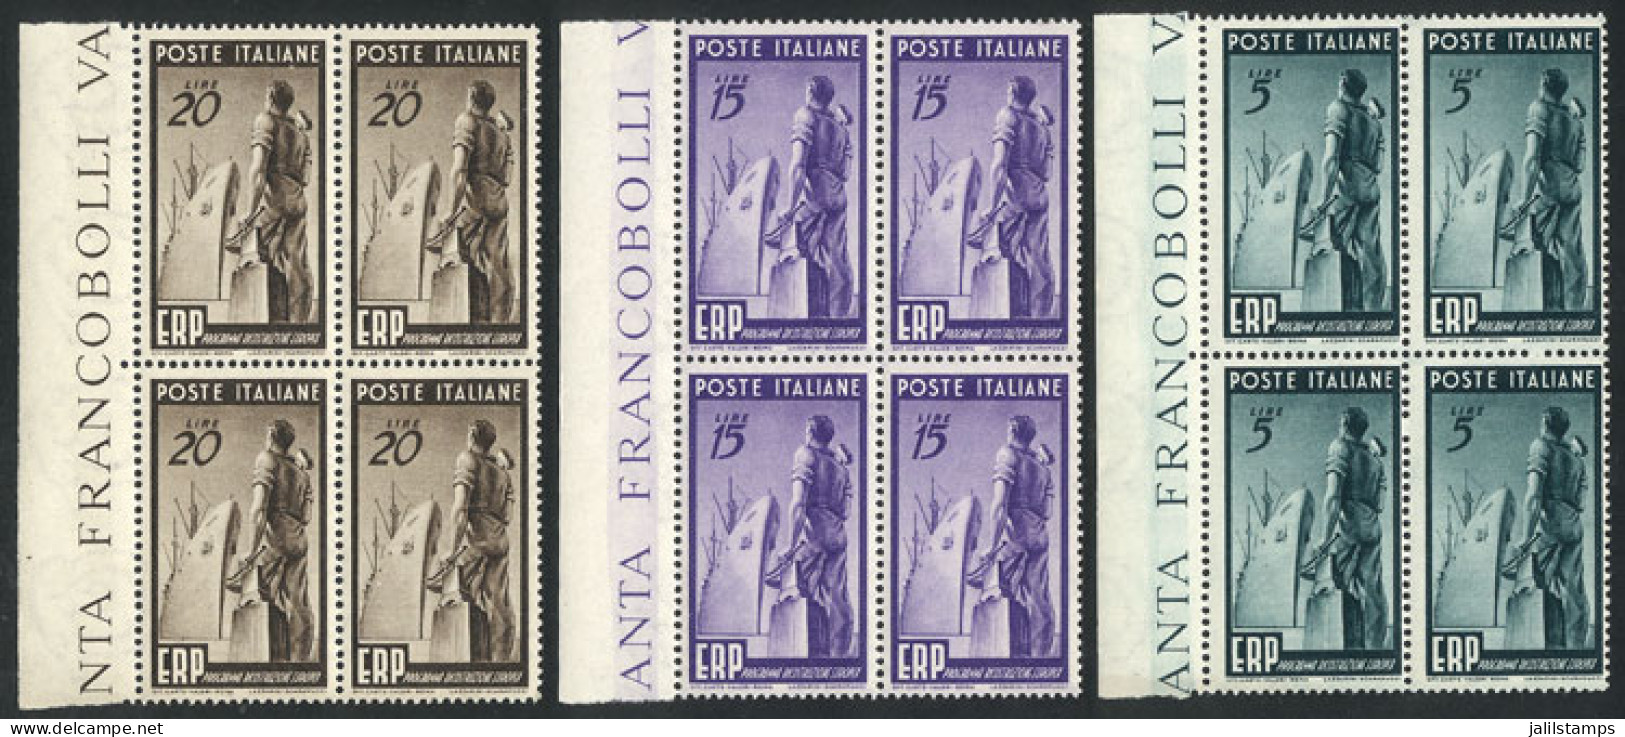 ITALY: Yvert 539/541, 1949 Reconstruction Of Europe, Cmpl. Set Of 3 Values In MNH Blocks Of 4 With Sheet Margins, Impecc - Unclassified